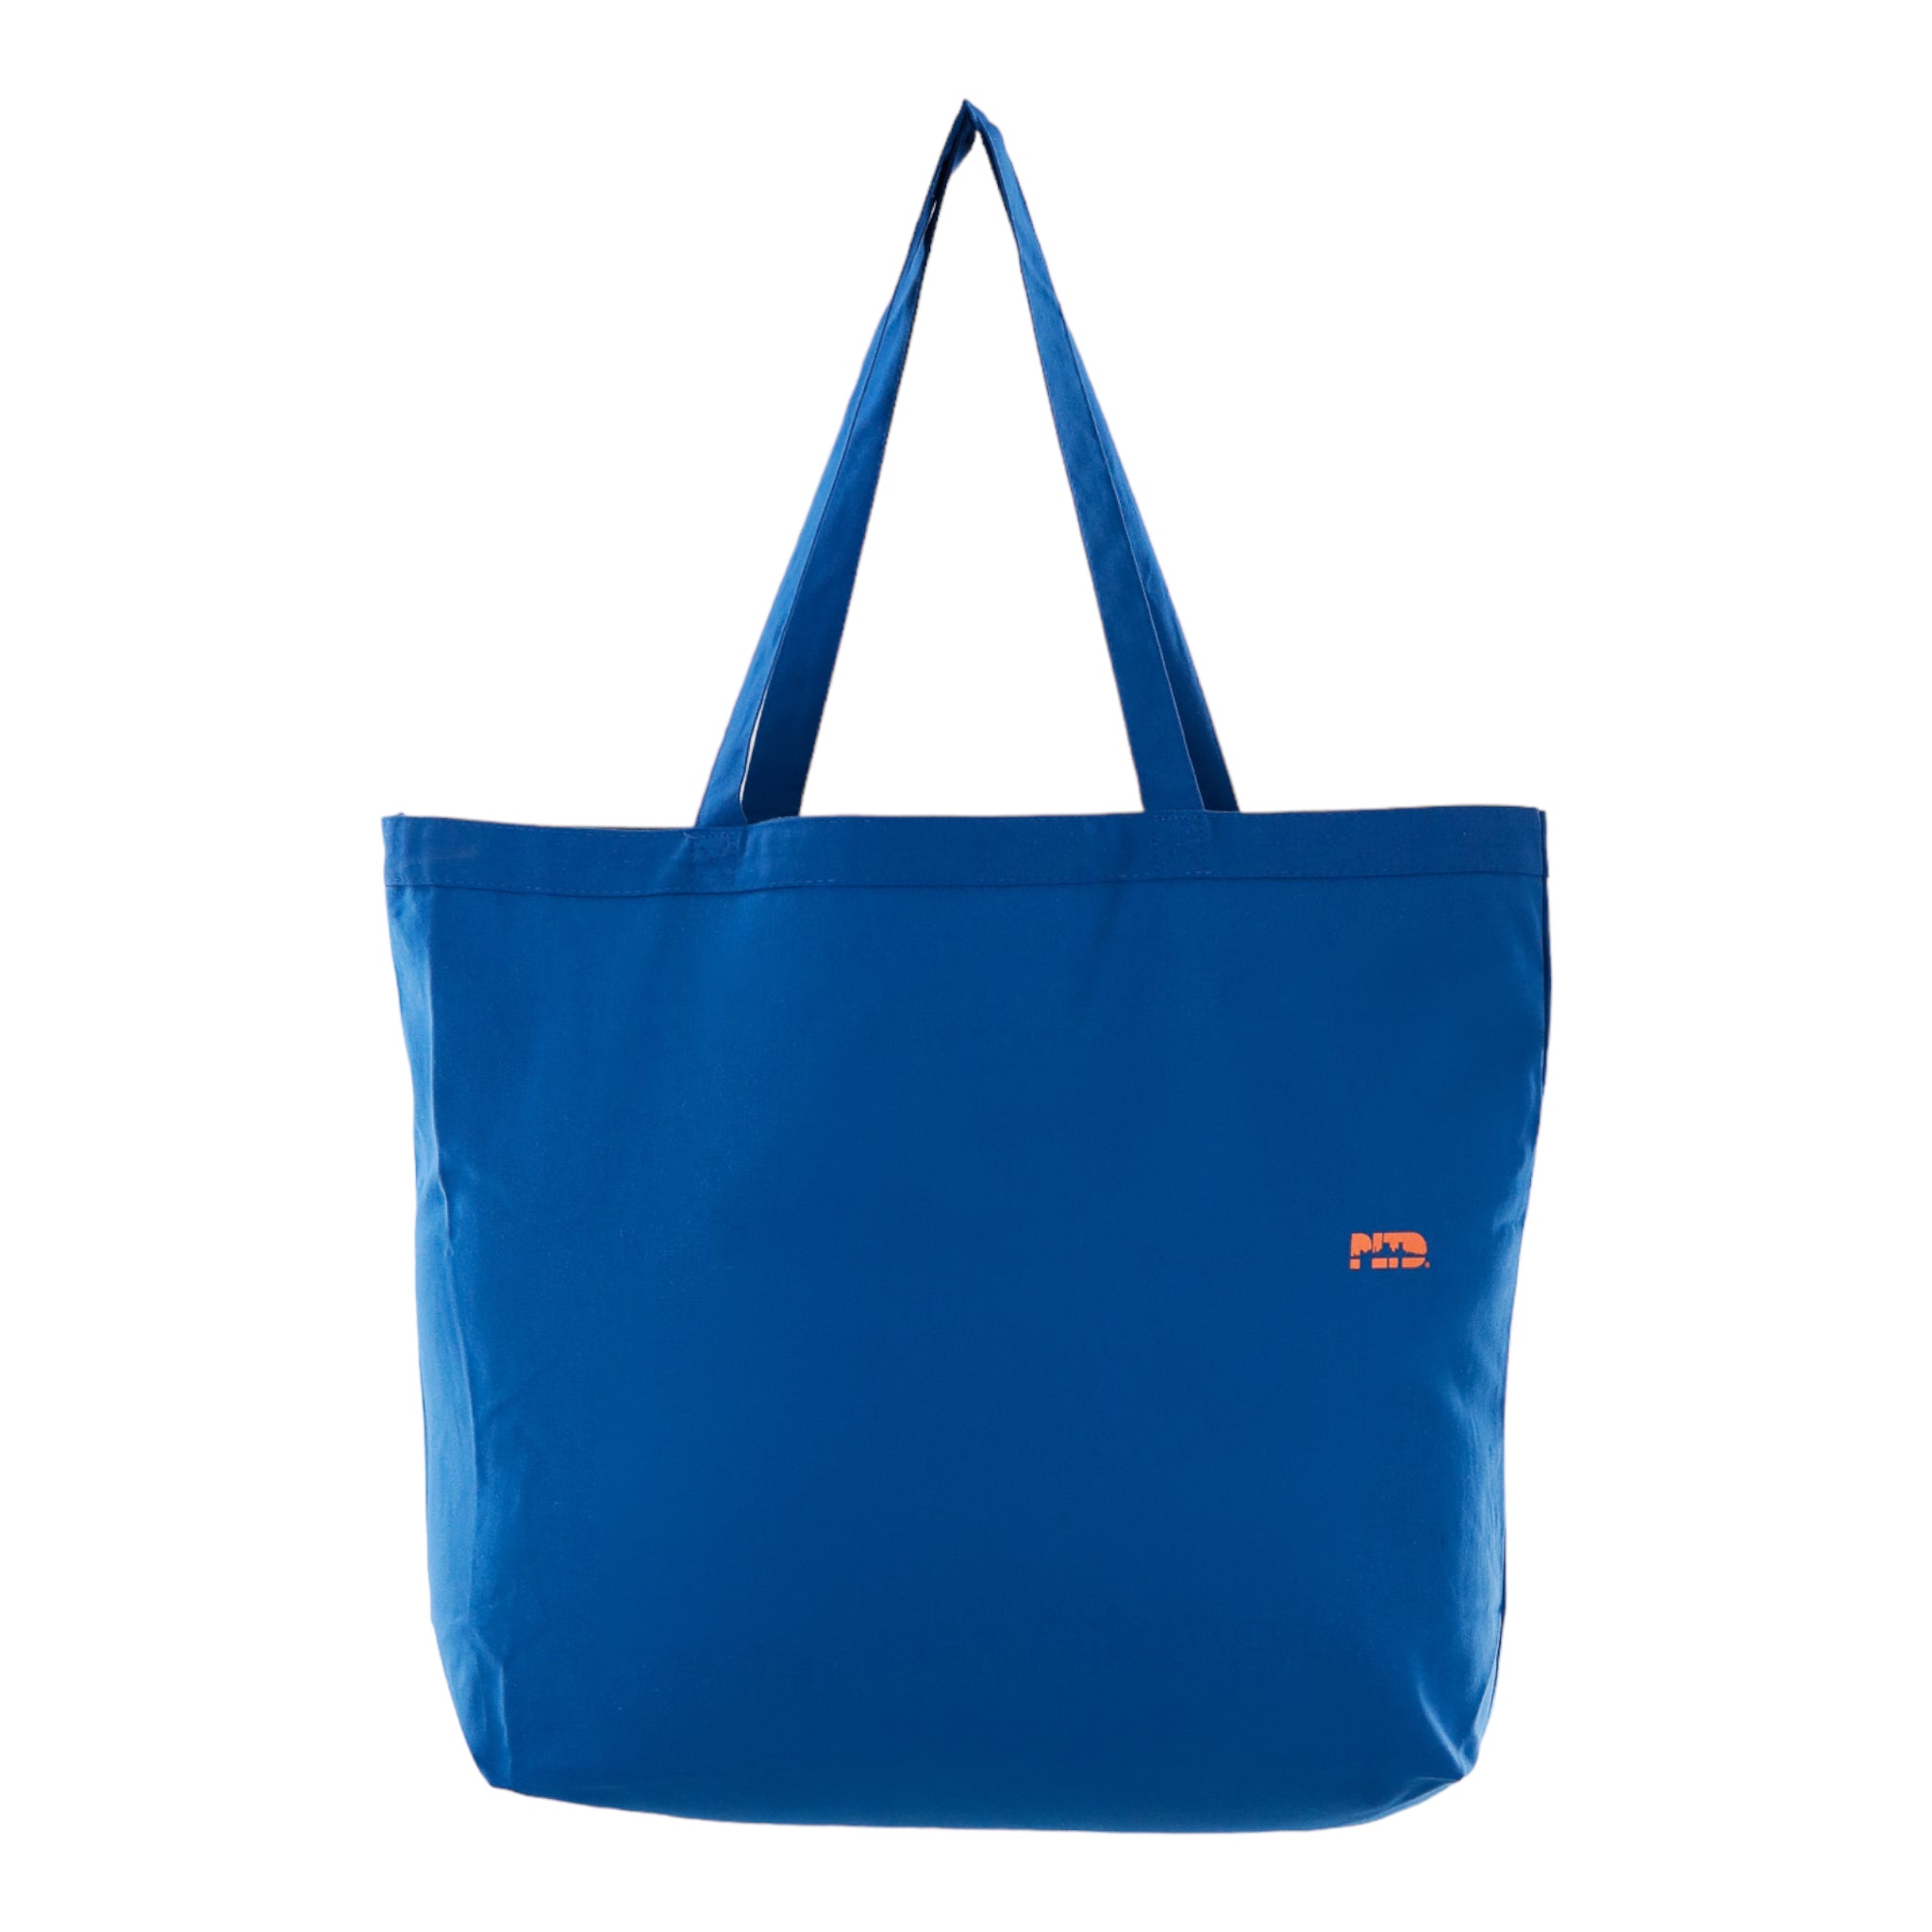 Stay Out of Uptown - Royal Knicks Canvas Tote Bag